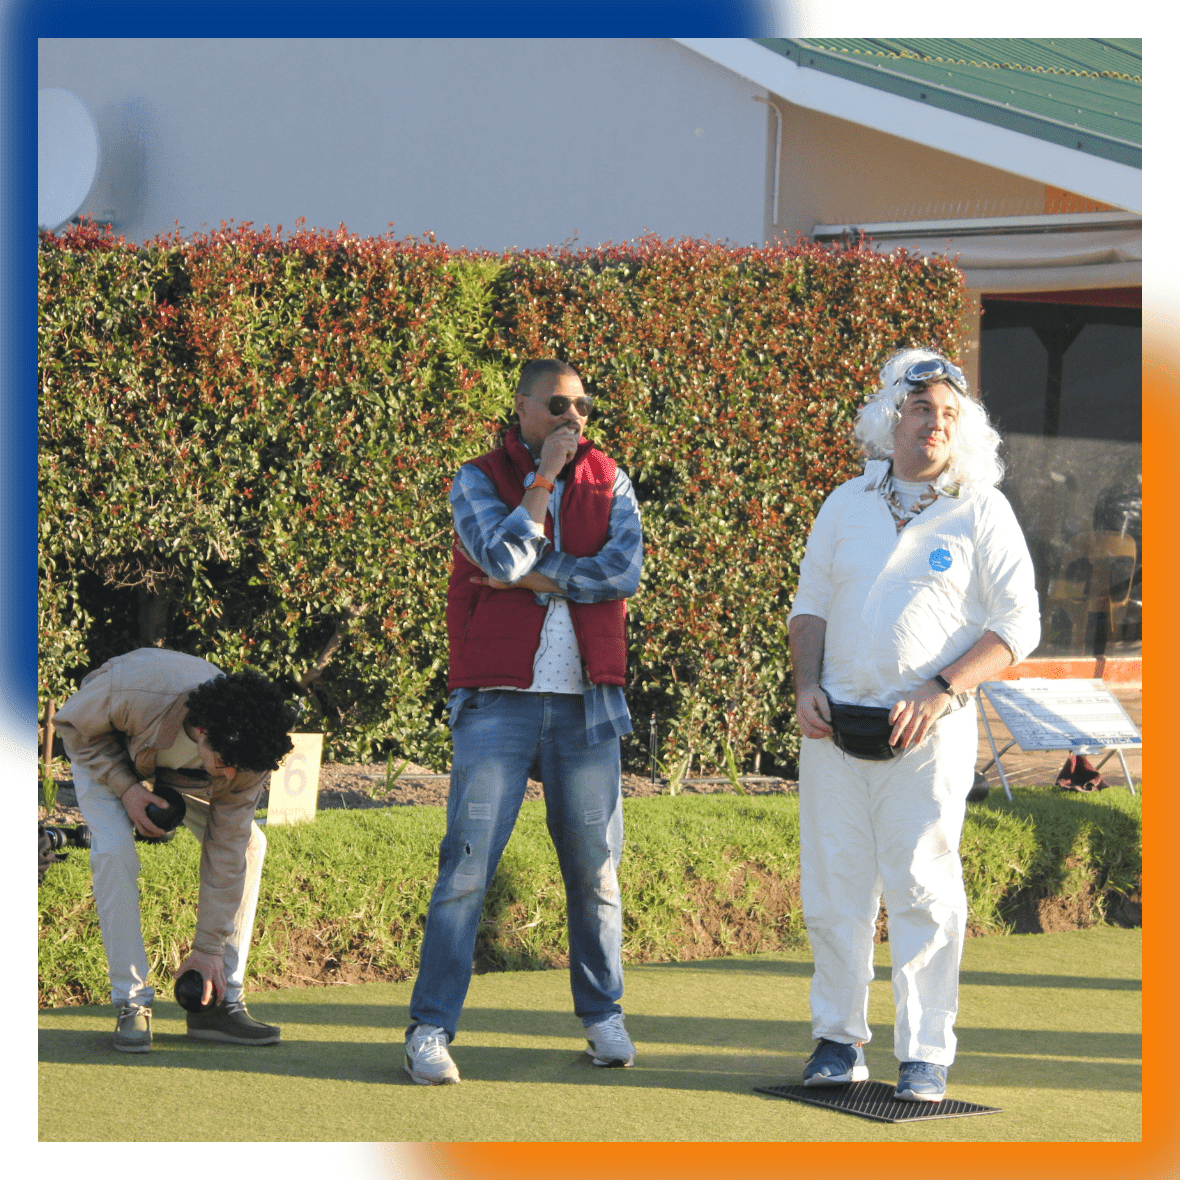 DSL Telecom team members watching other teams compete in the lawn bowls tournament.